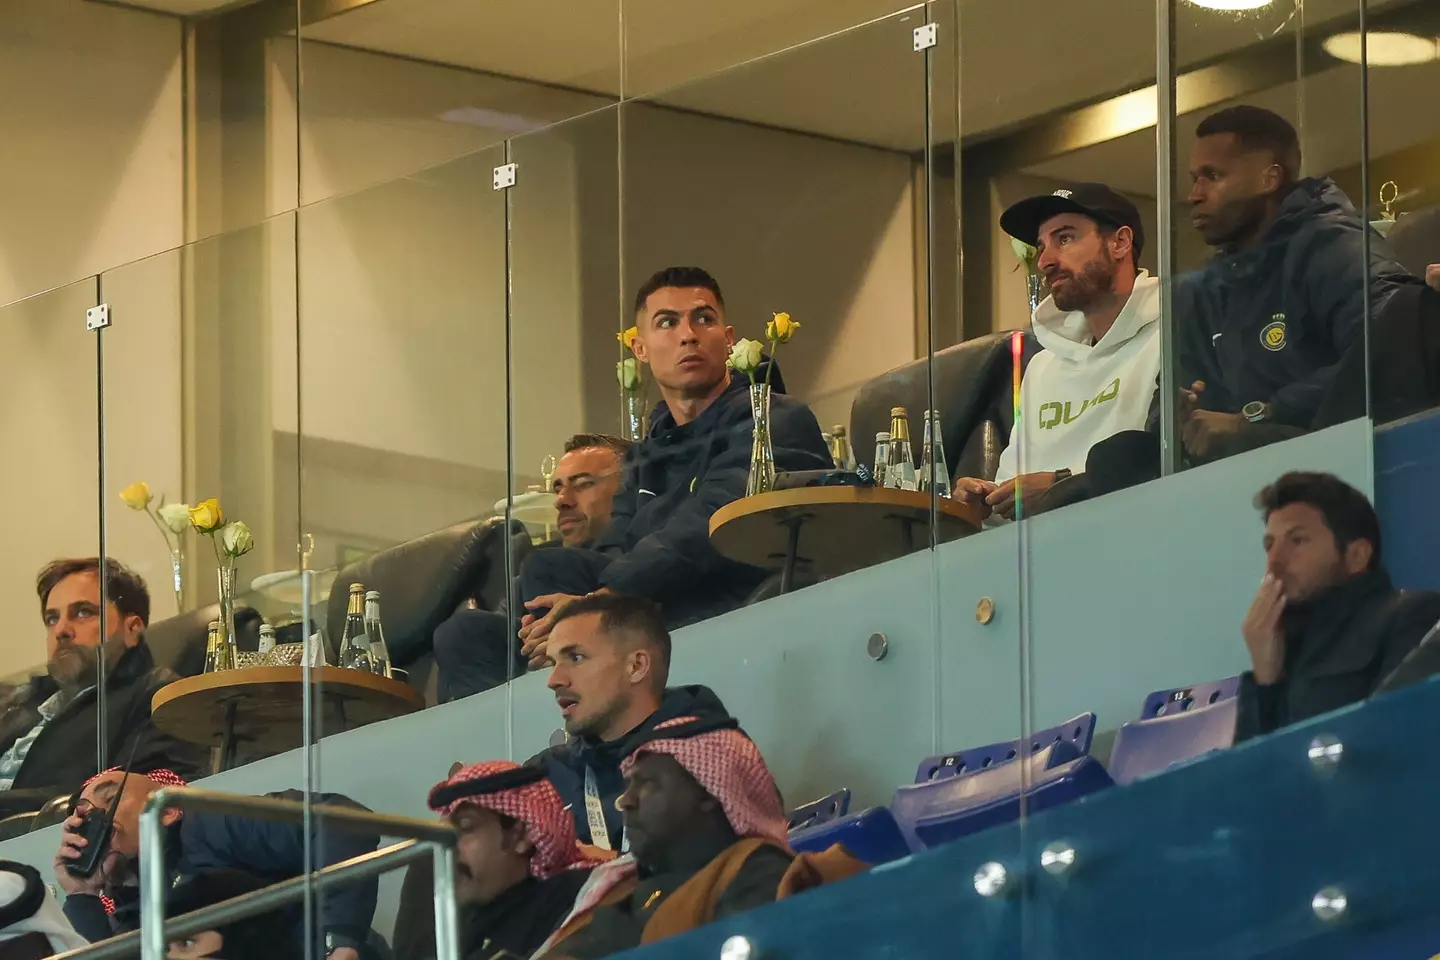 Cristiano Ronaldo watches from the stands. Image: Getty